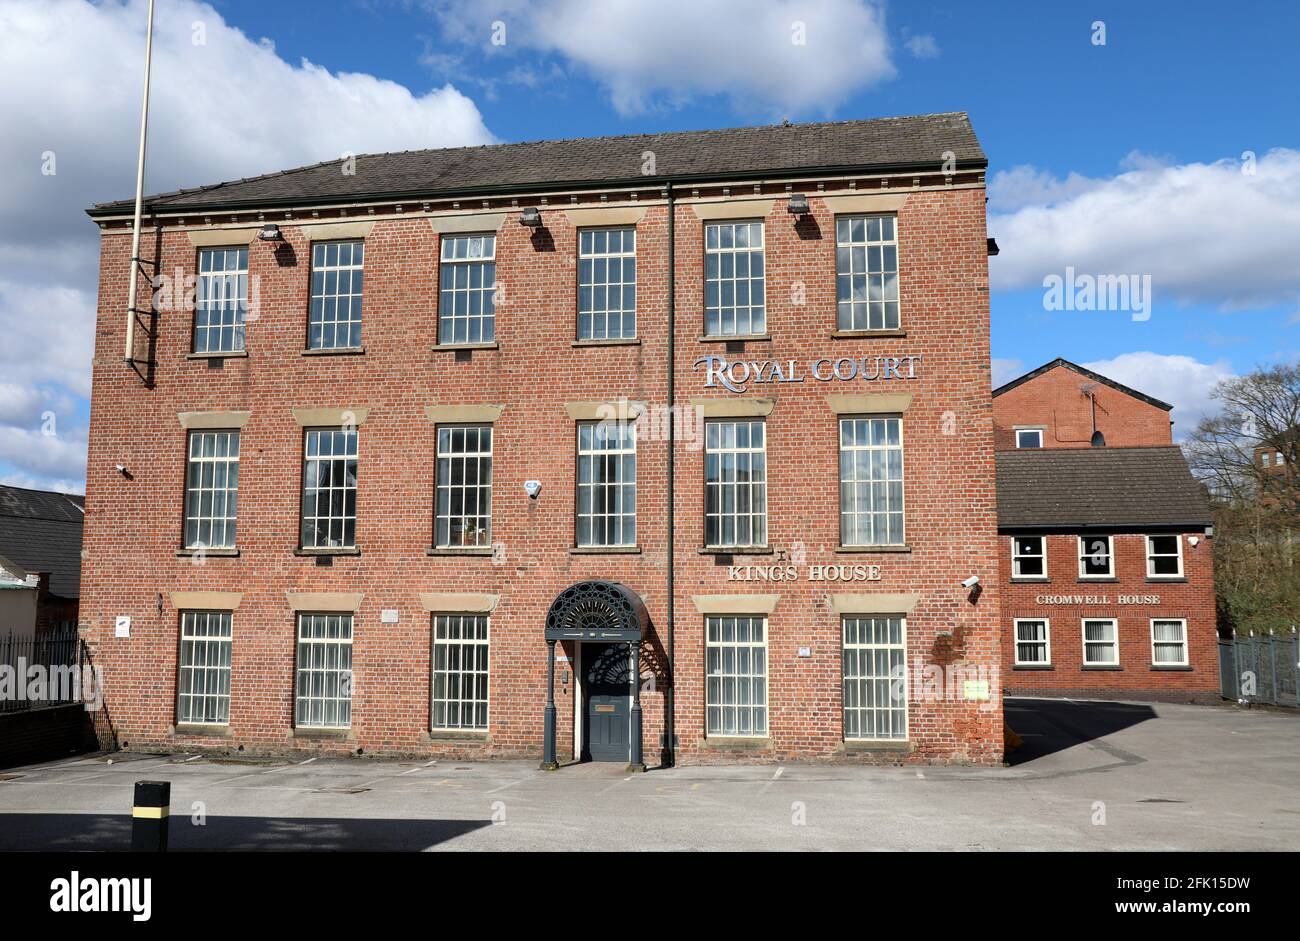 Royal Court silk heritage architecture at Macclesfield in Cheshire Stock Photo